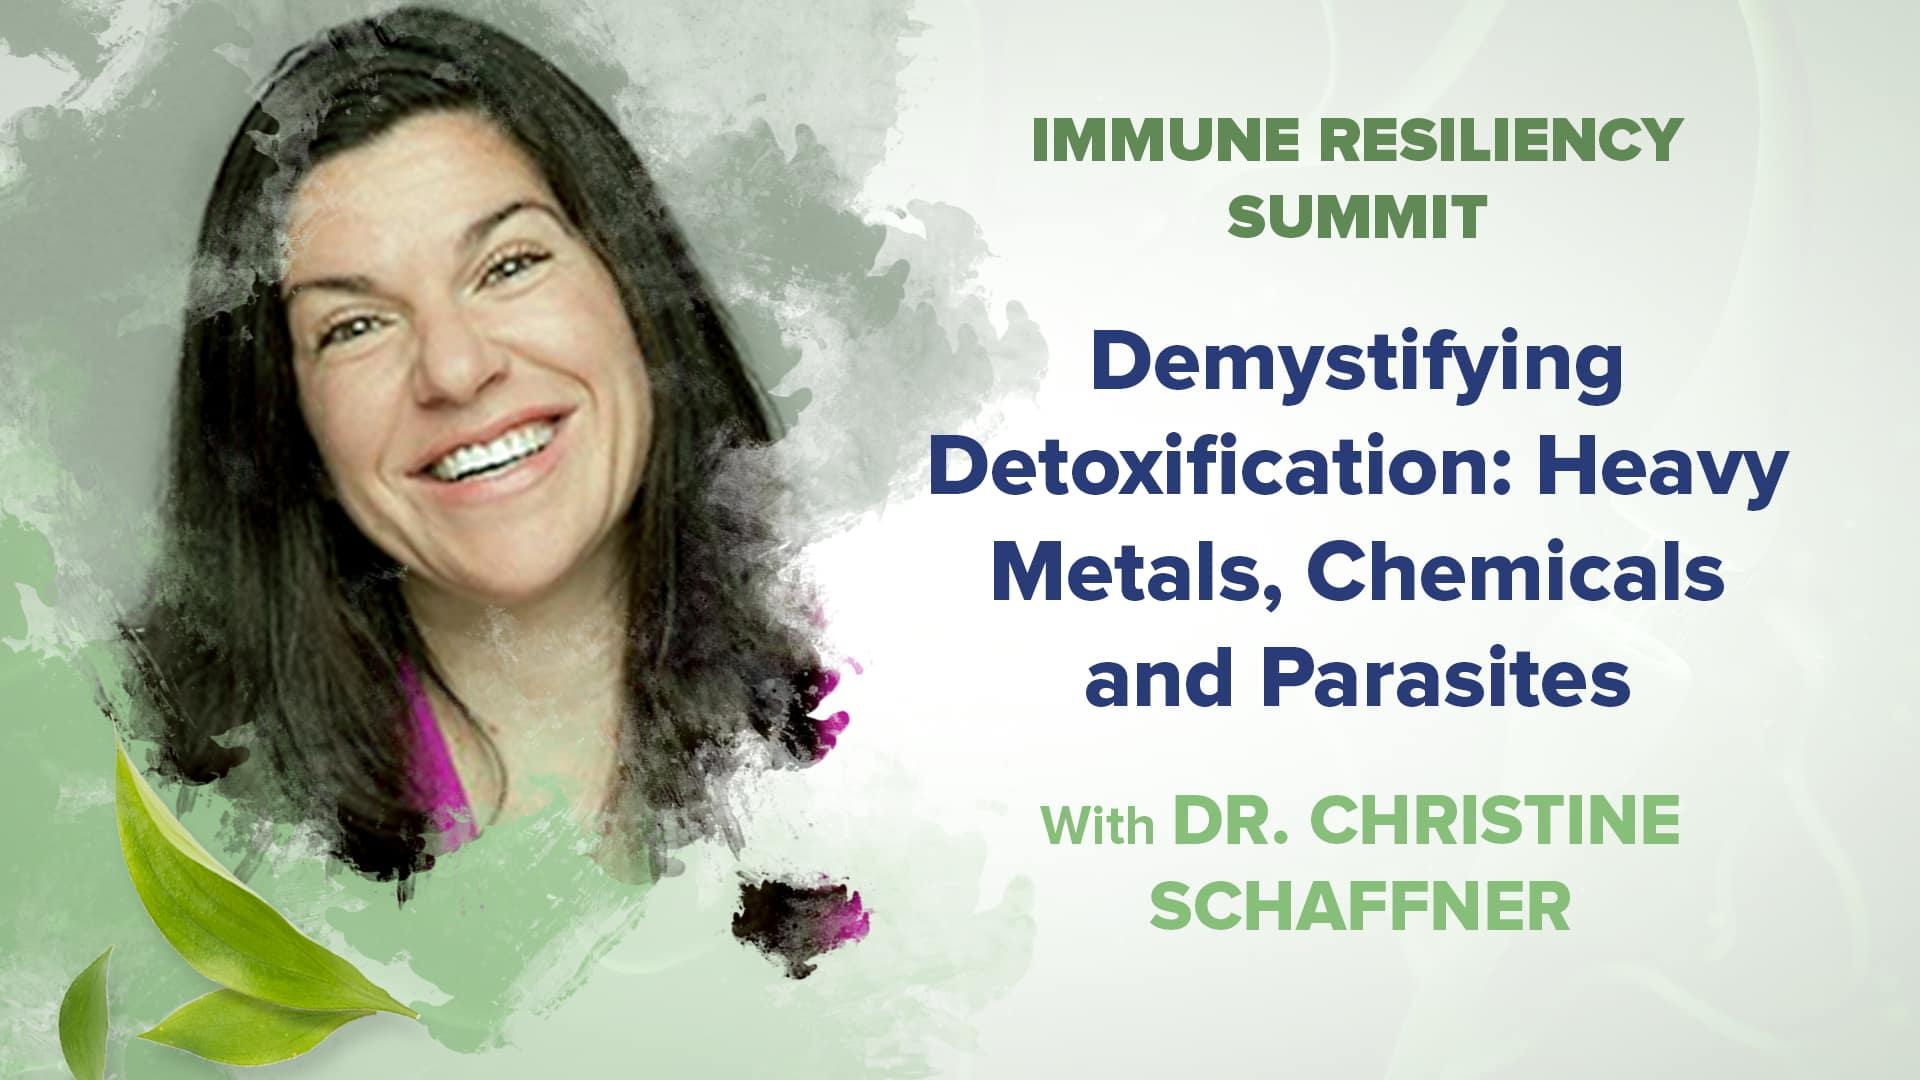 Demystifying Detoxification: Heavy Metals, Chemicals and Parasites